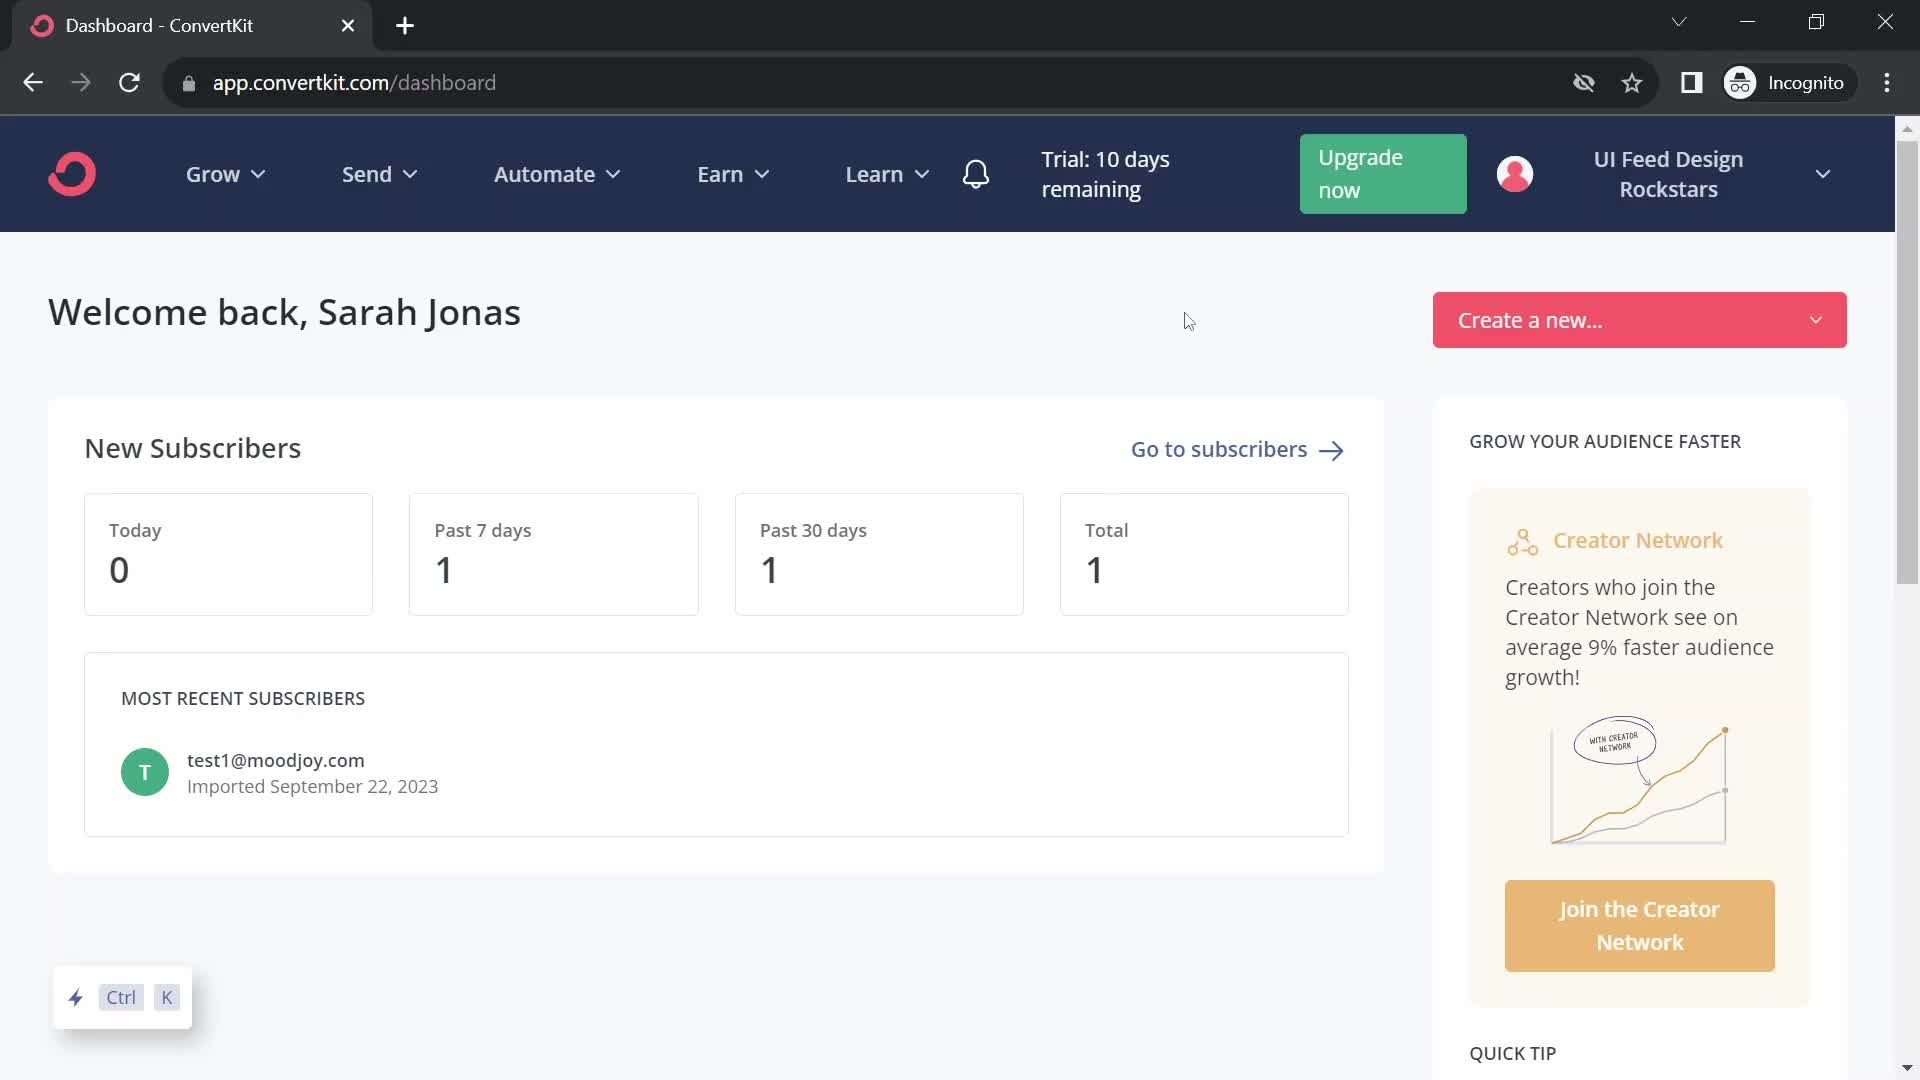 Screenshot of Dashboard on Inviting people on ConvertKit user flow